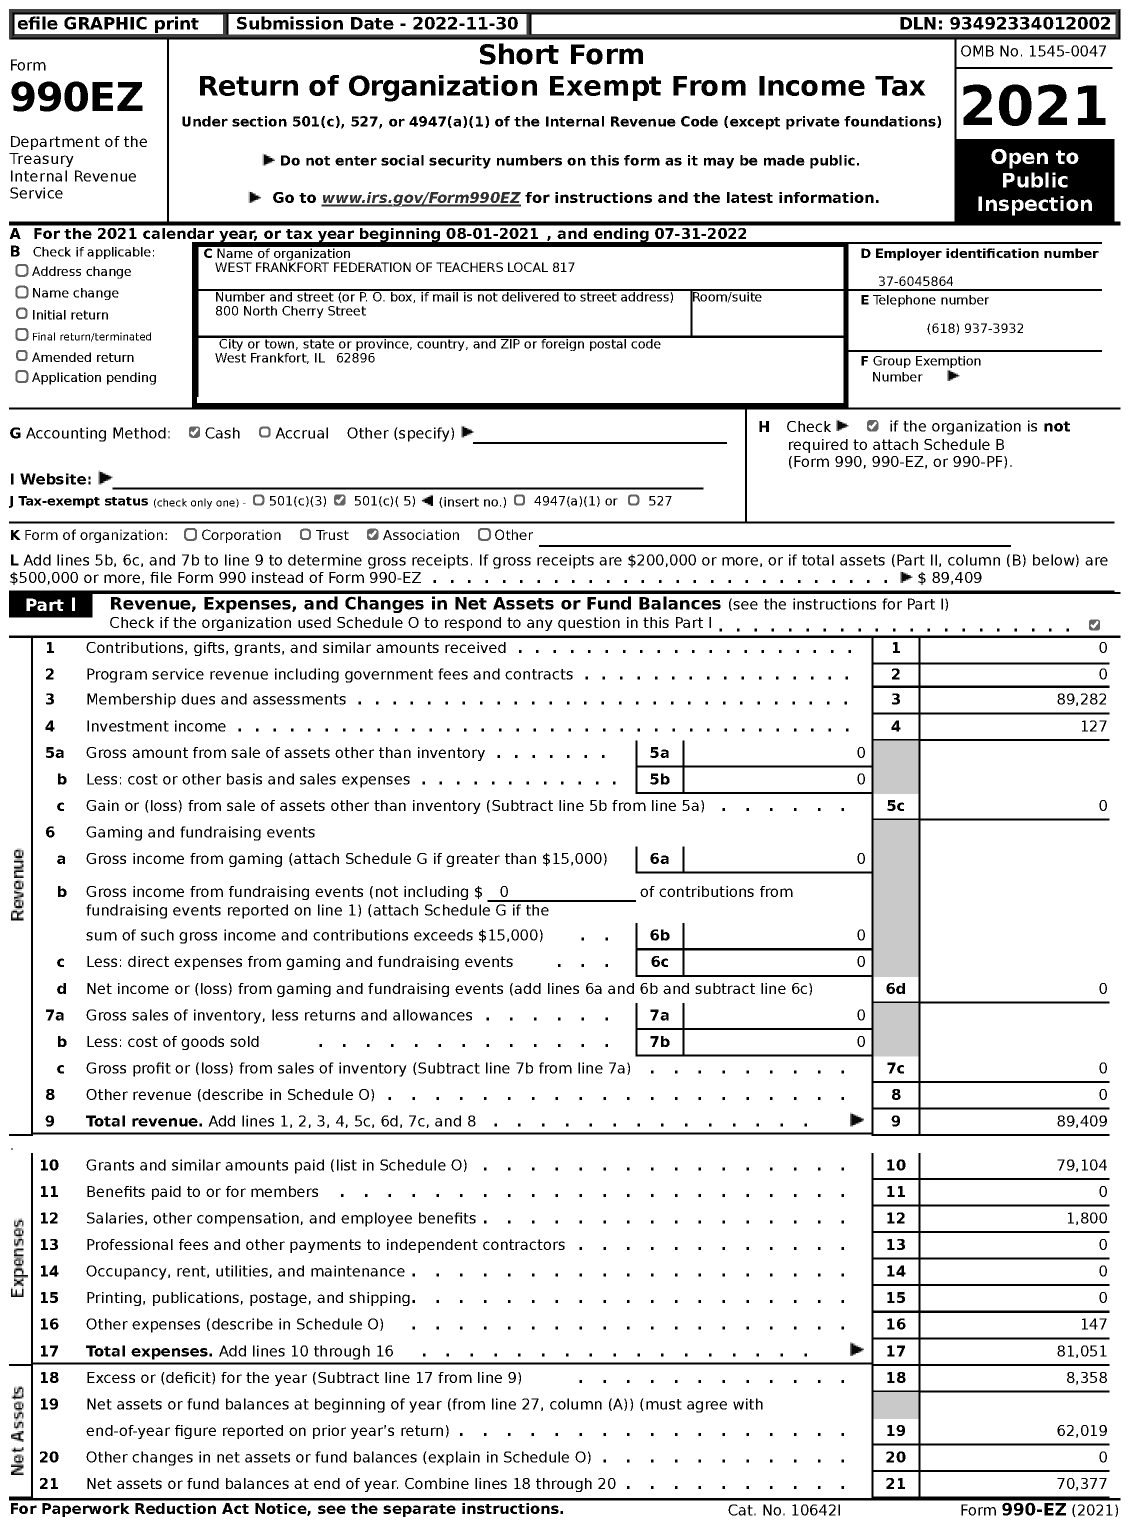 Image of first page of 2021 Form 990EZ for West Frankfort Federation of Teachers Local 817